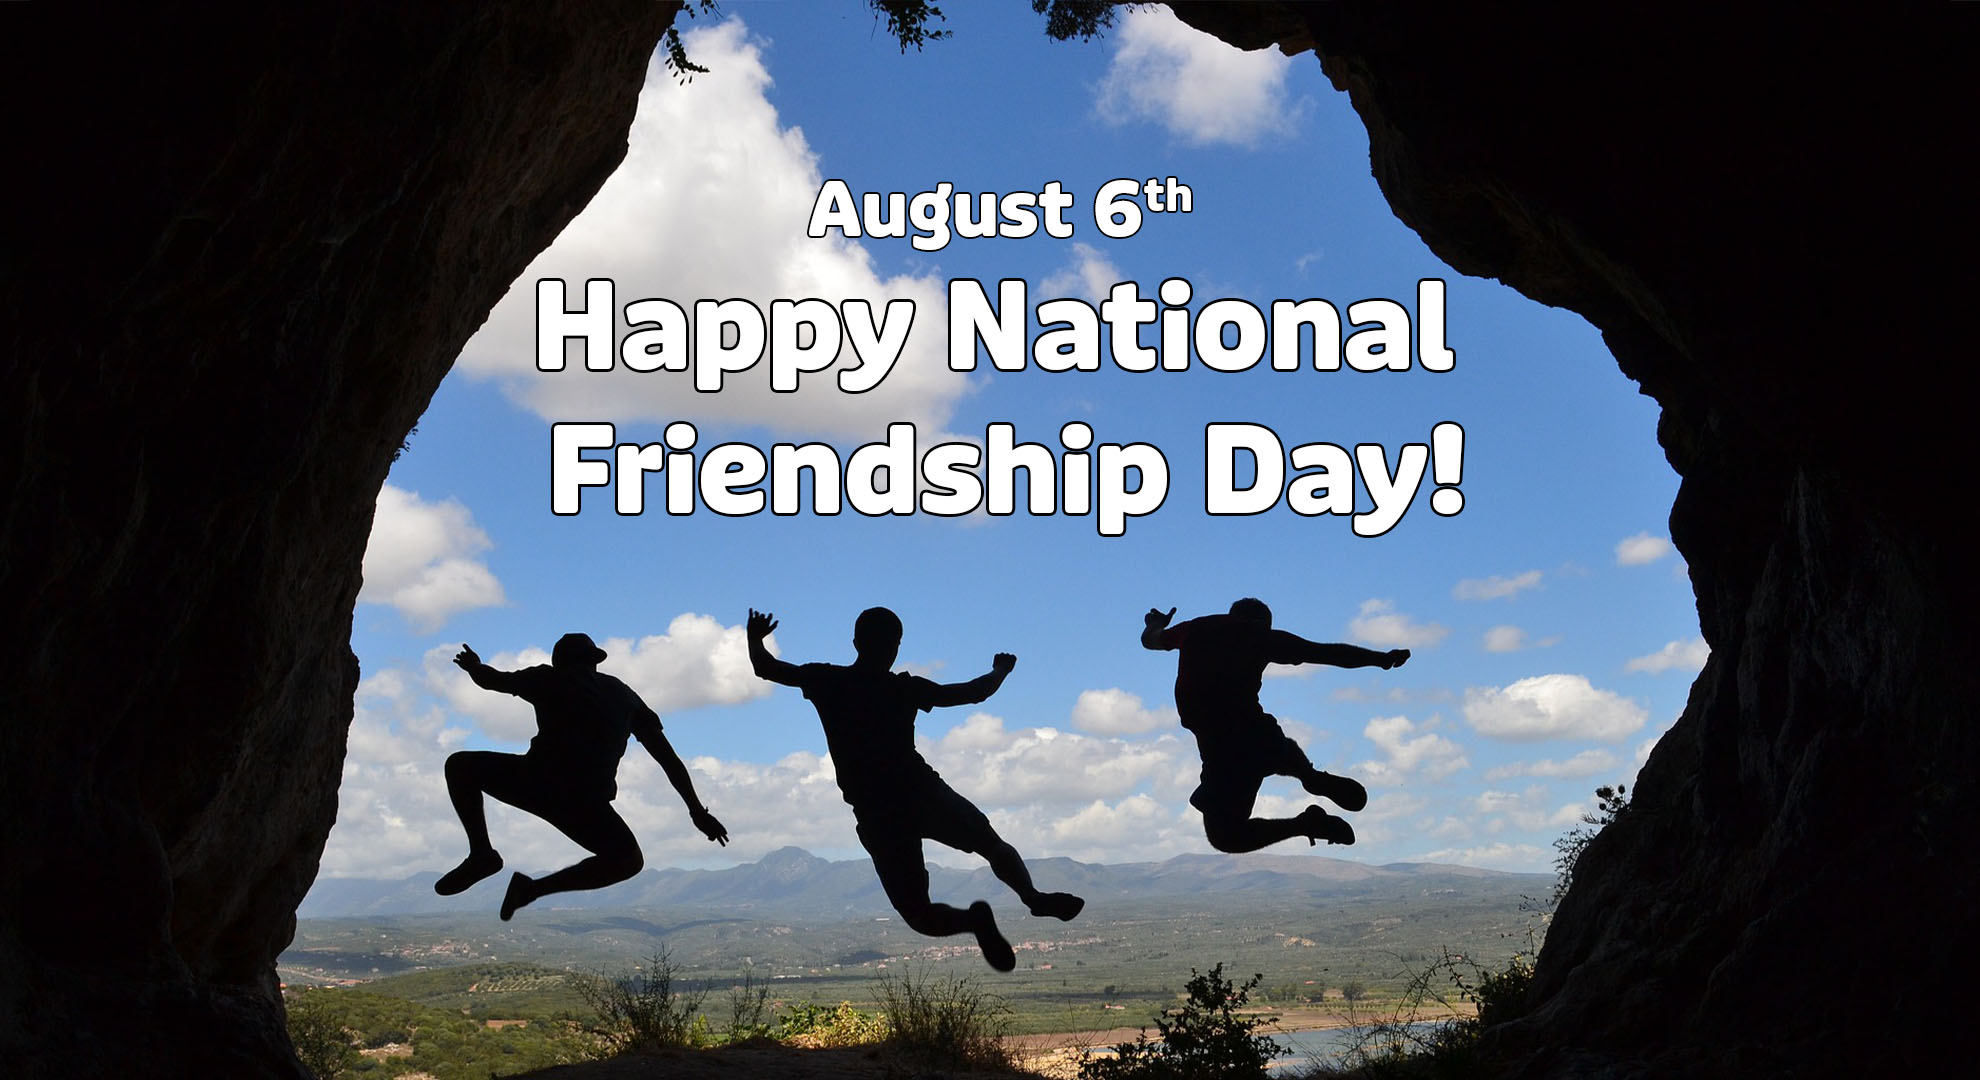 Photo is taken inside a cave looking out to a scene of mountains and hills. There are 3 people jumping and posing in the air. Above them reads August 6th Happy National Friendship Day! In a white sans serif font with a black outline.